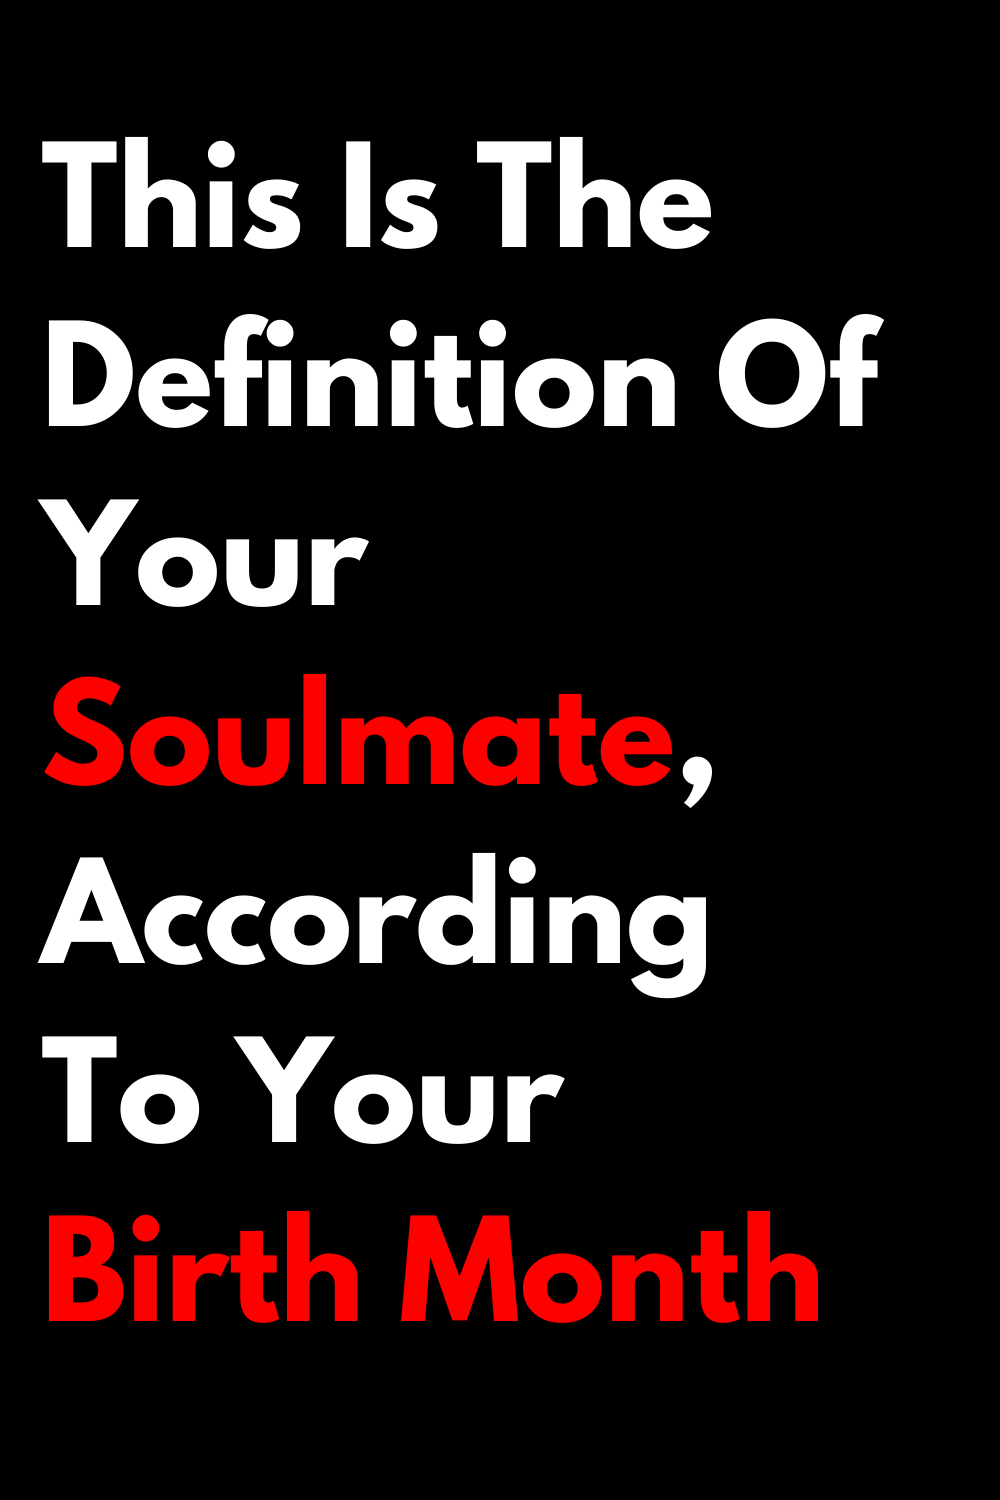 This Is The Definition Of Your Soulmate, According To Your Birth Month